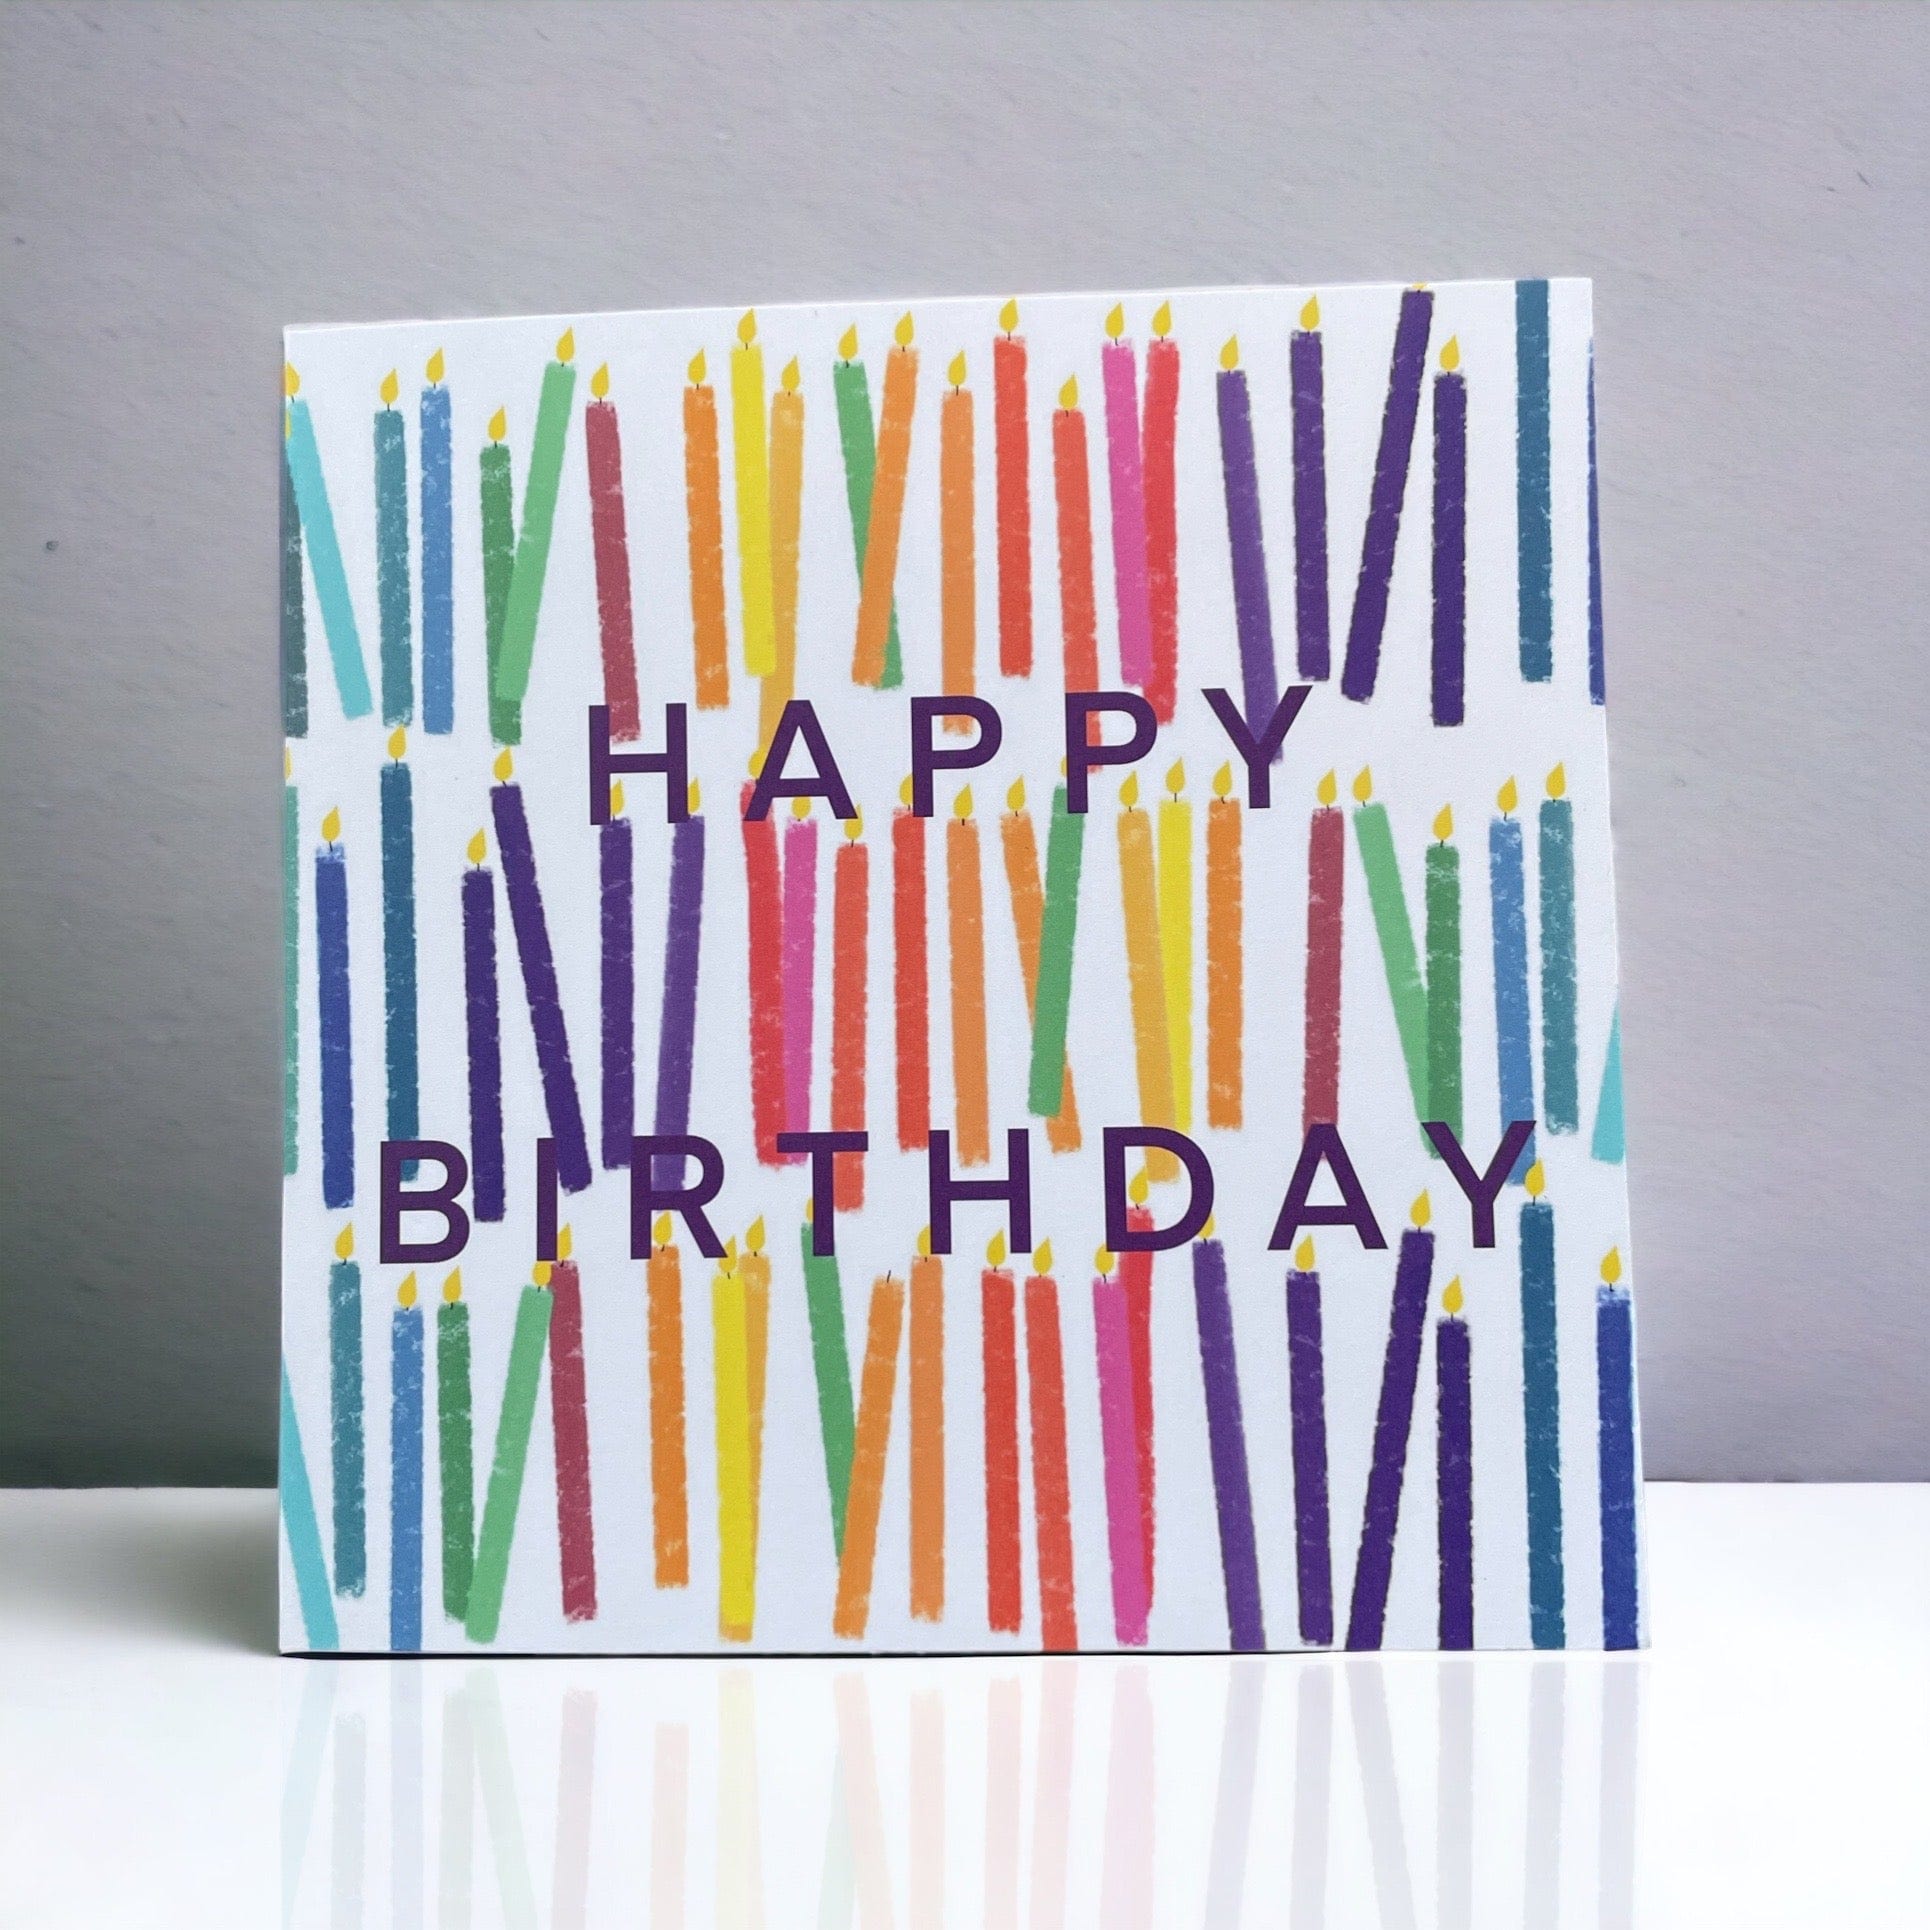 Happy birthday rainbow candles card Cards And Hope Designs   